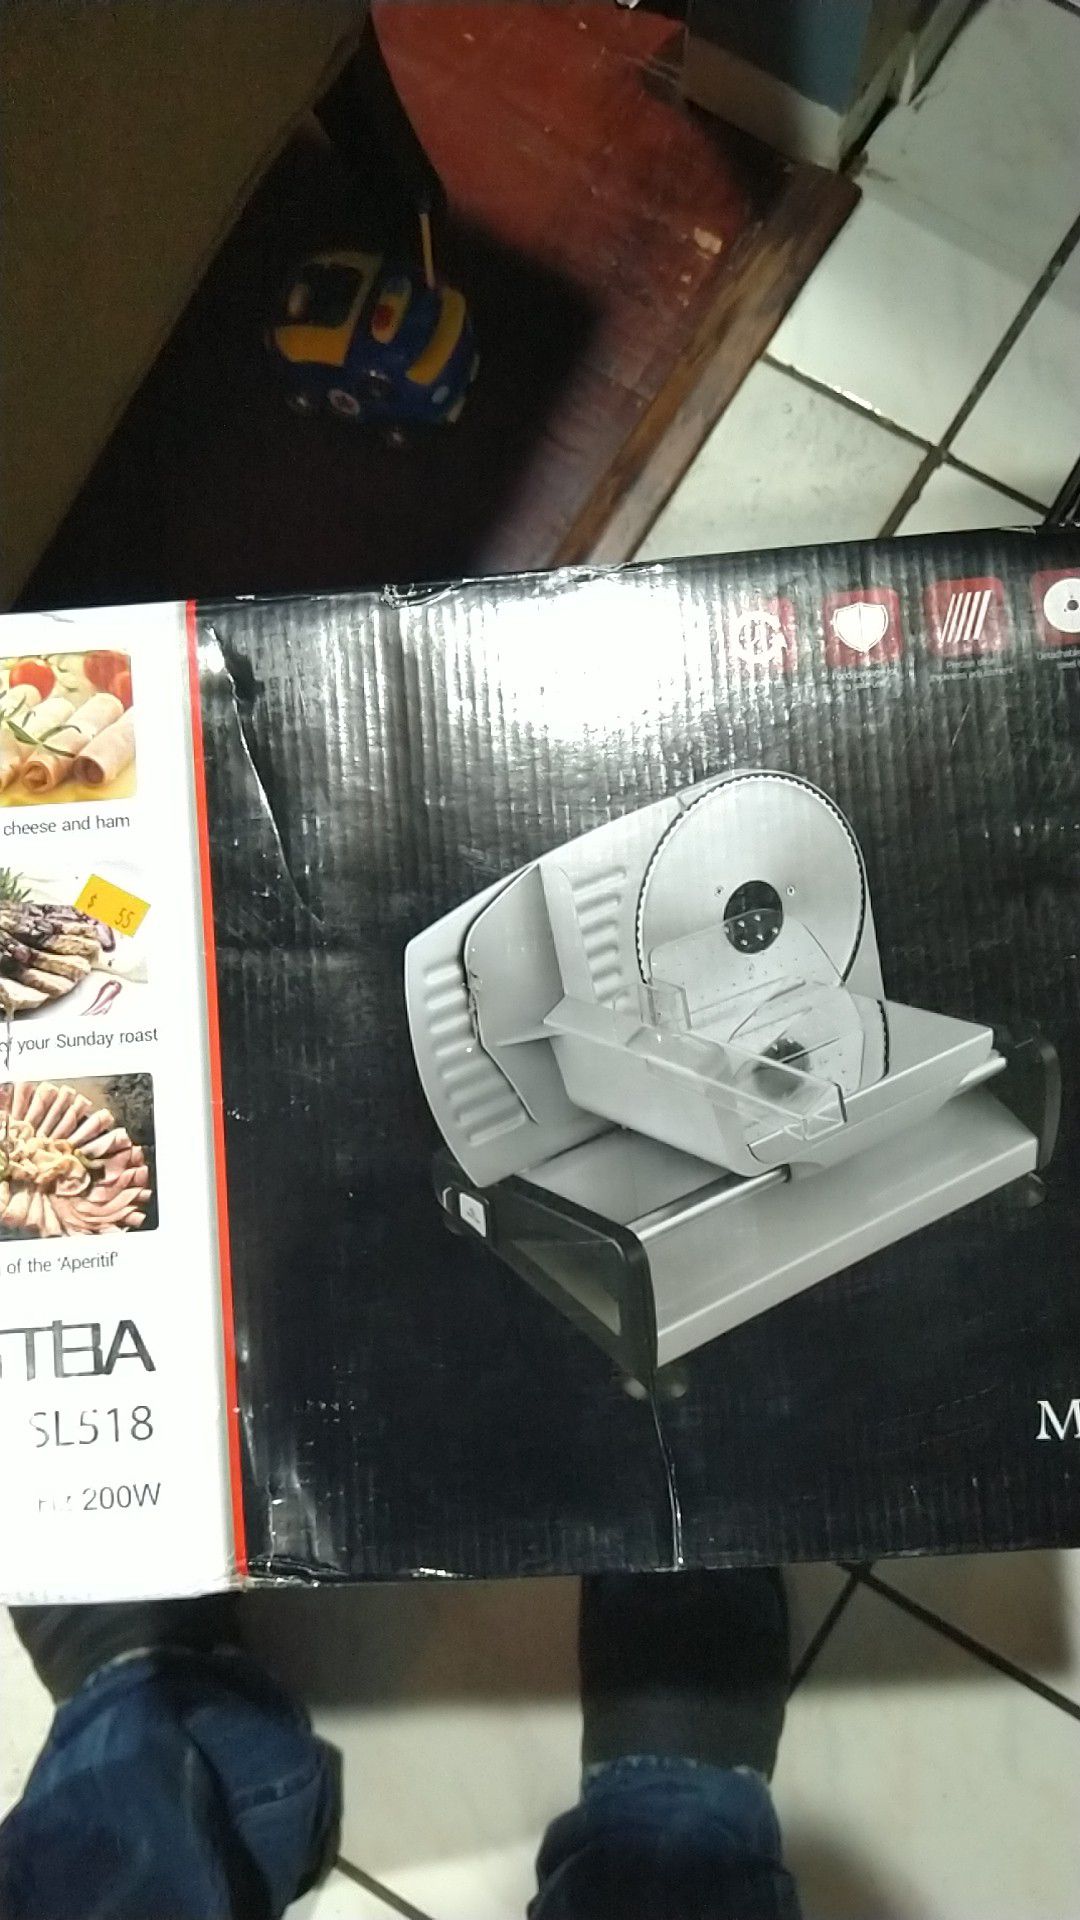 OSTBA Home Deli Food Meat Slicer Electric Removable 7.5'' Stainless Steel  Blade